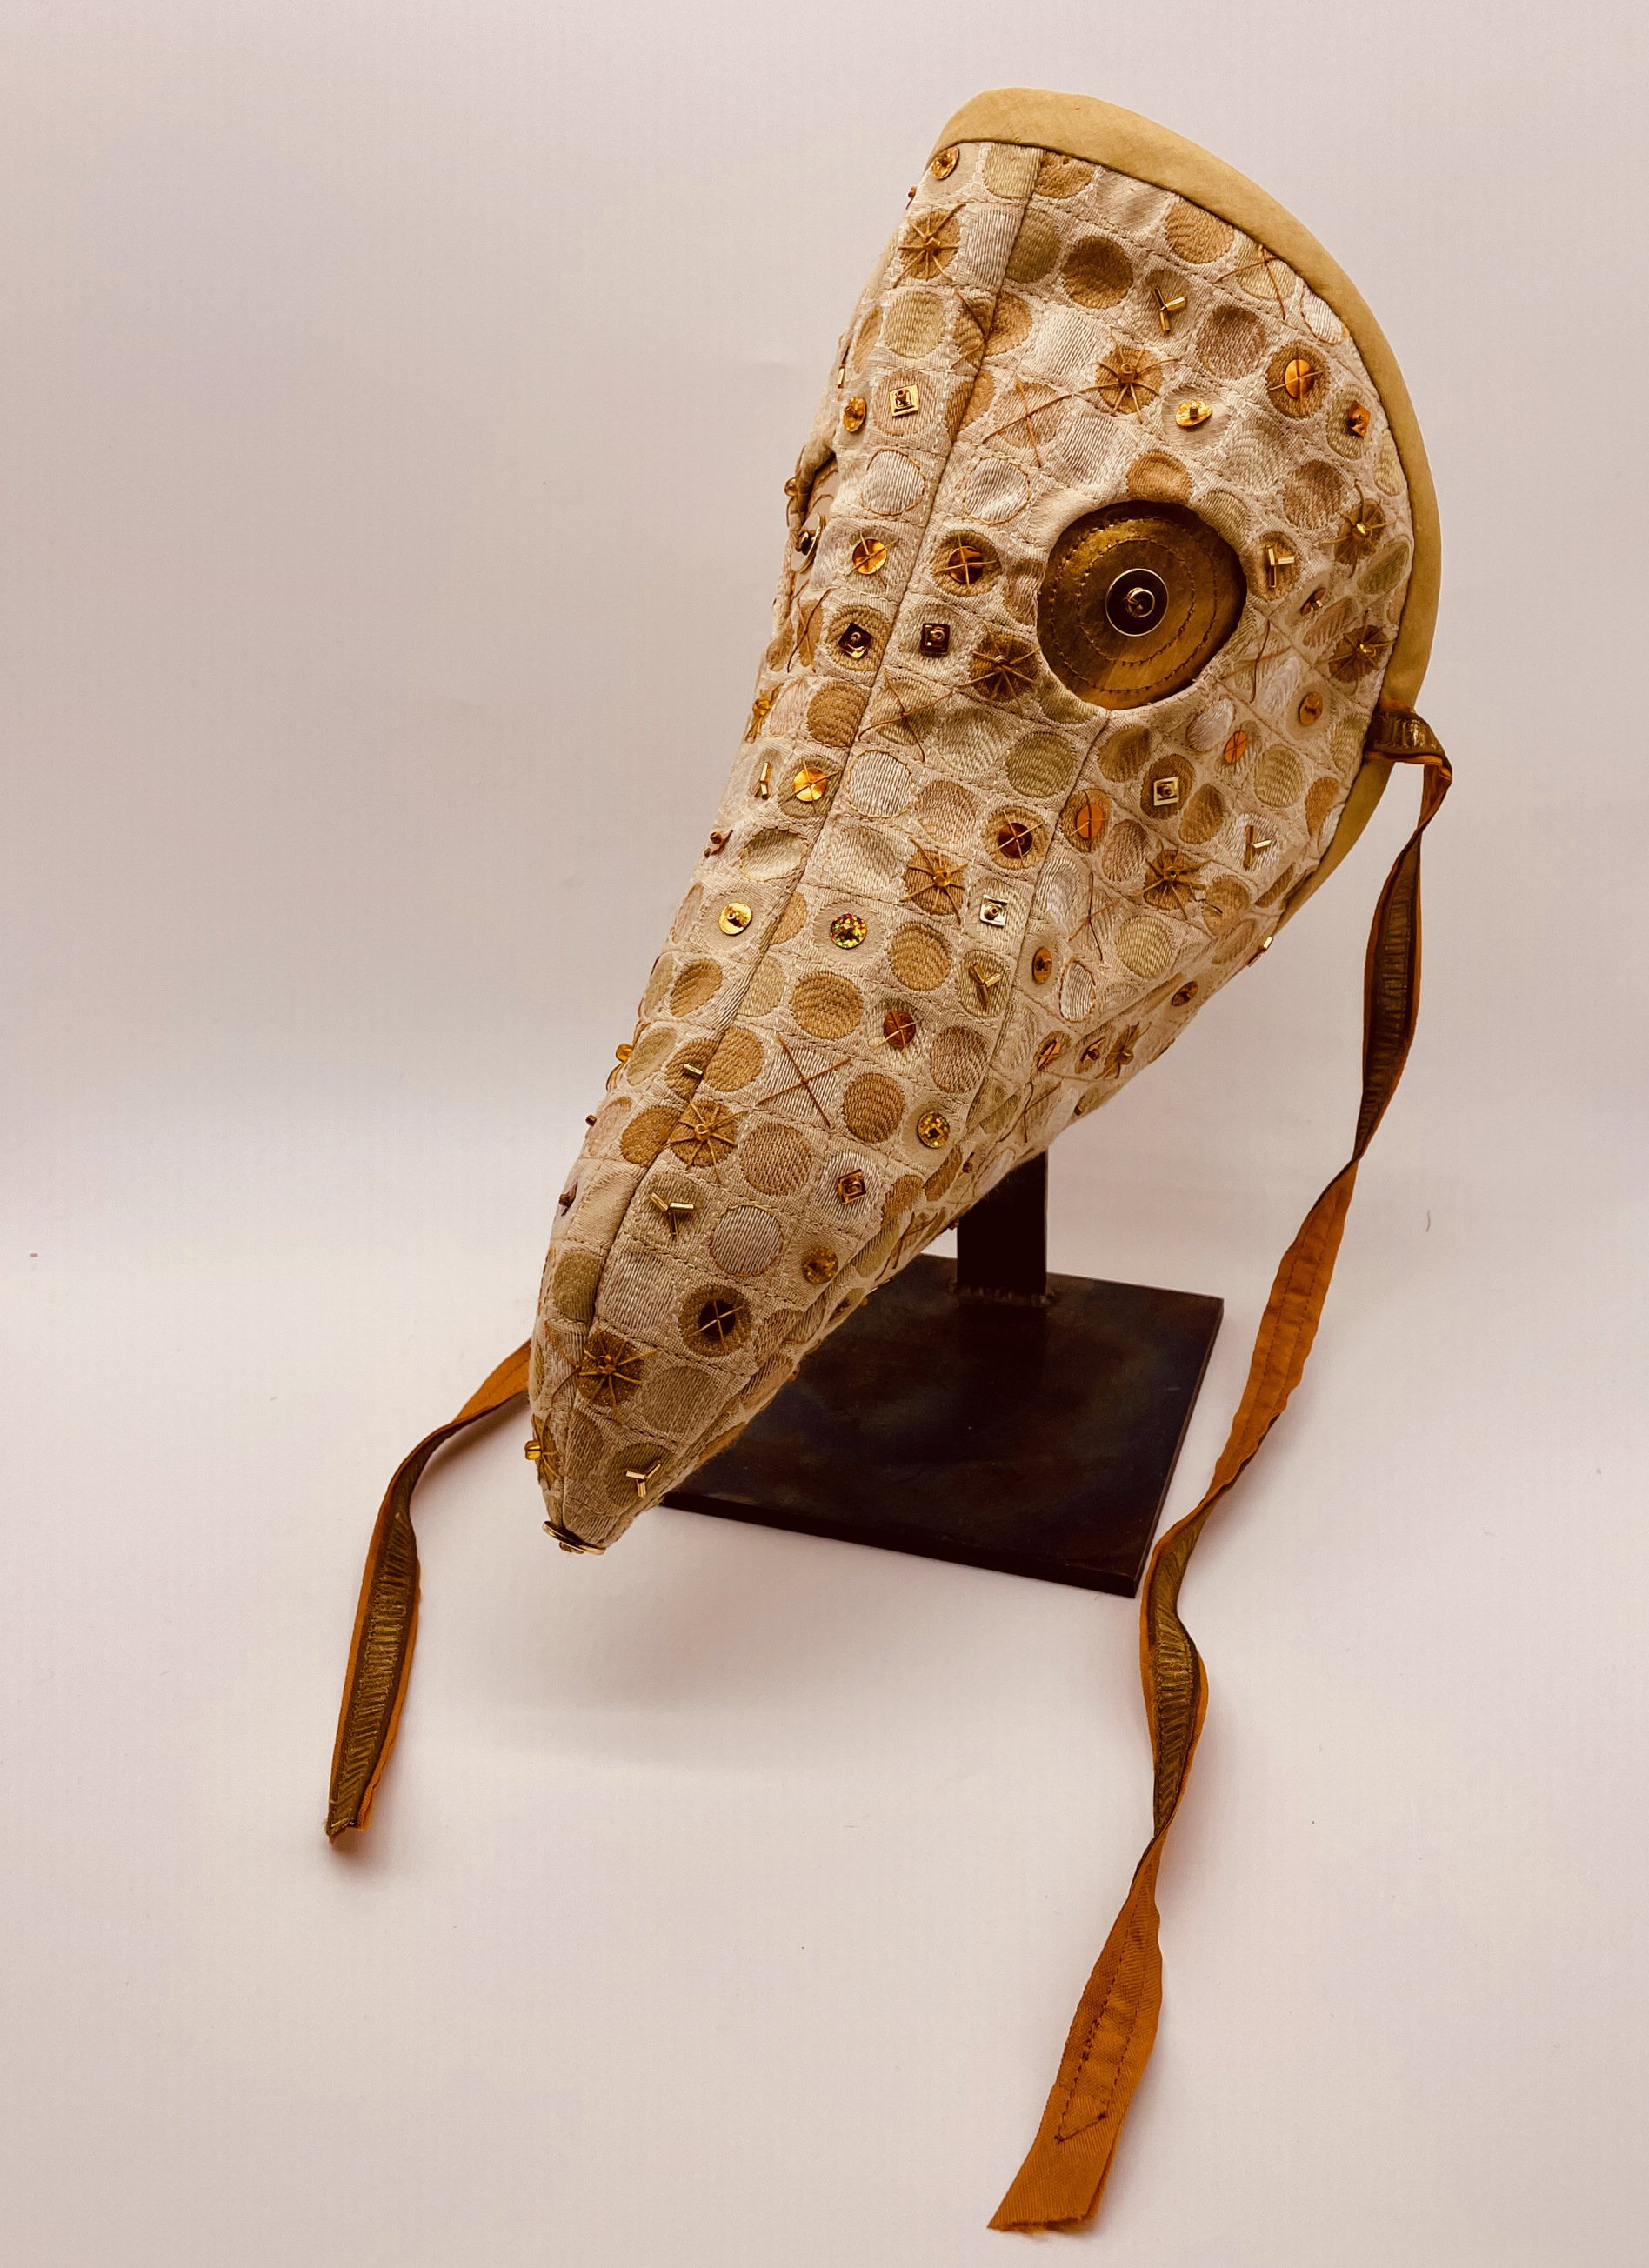 First-place Soft Crafts Award, Lu Peters, The Plague Doctor Mask, 2022.